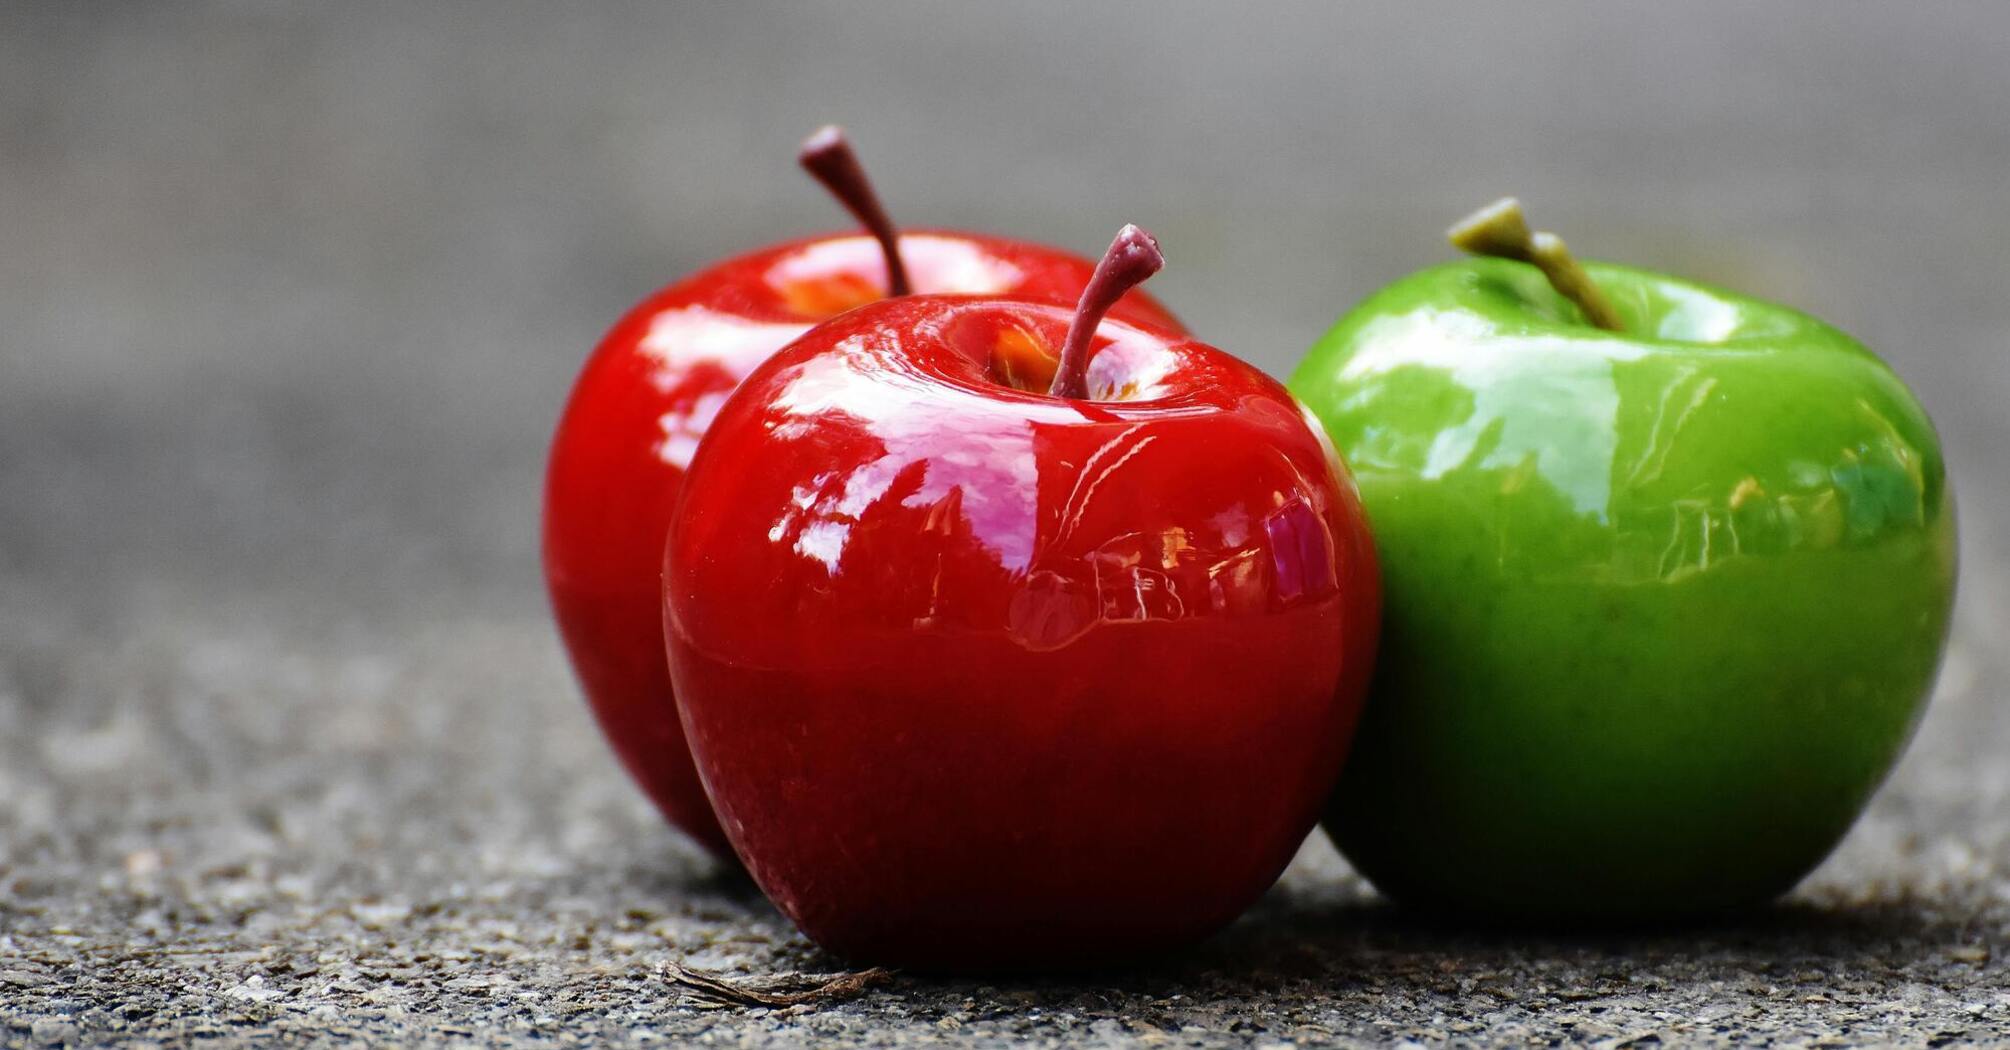 Three glossy apples on a concrete surface, with two red apples and one green apple